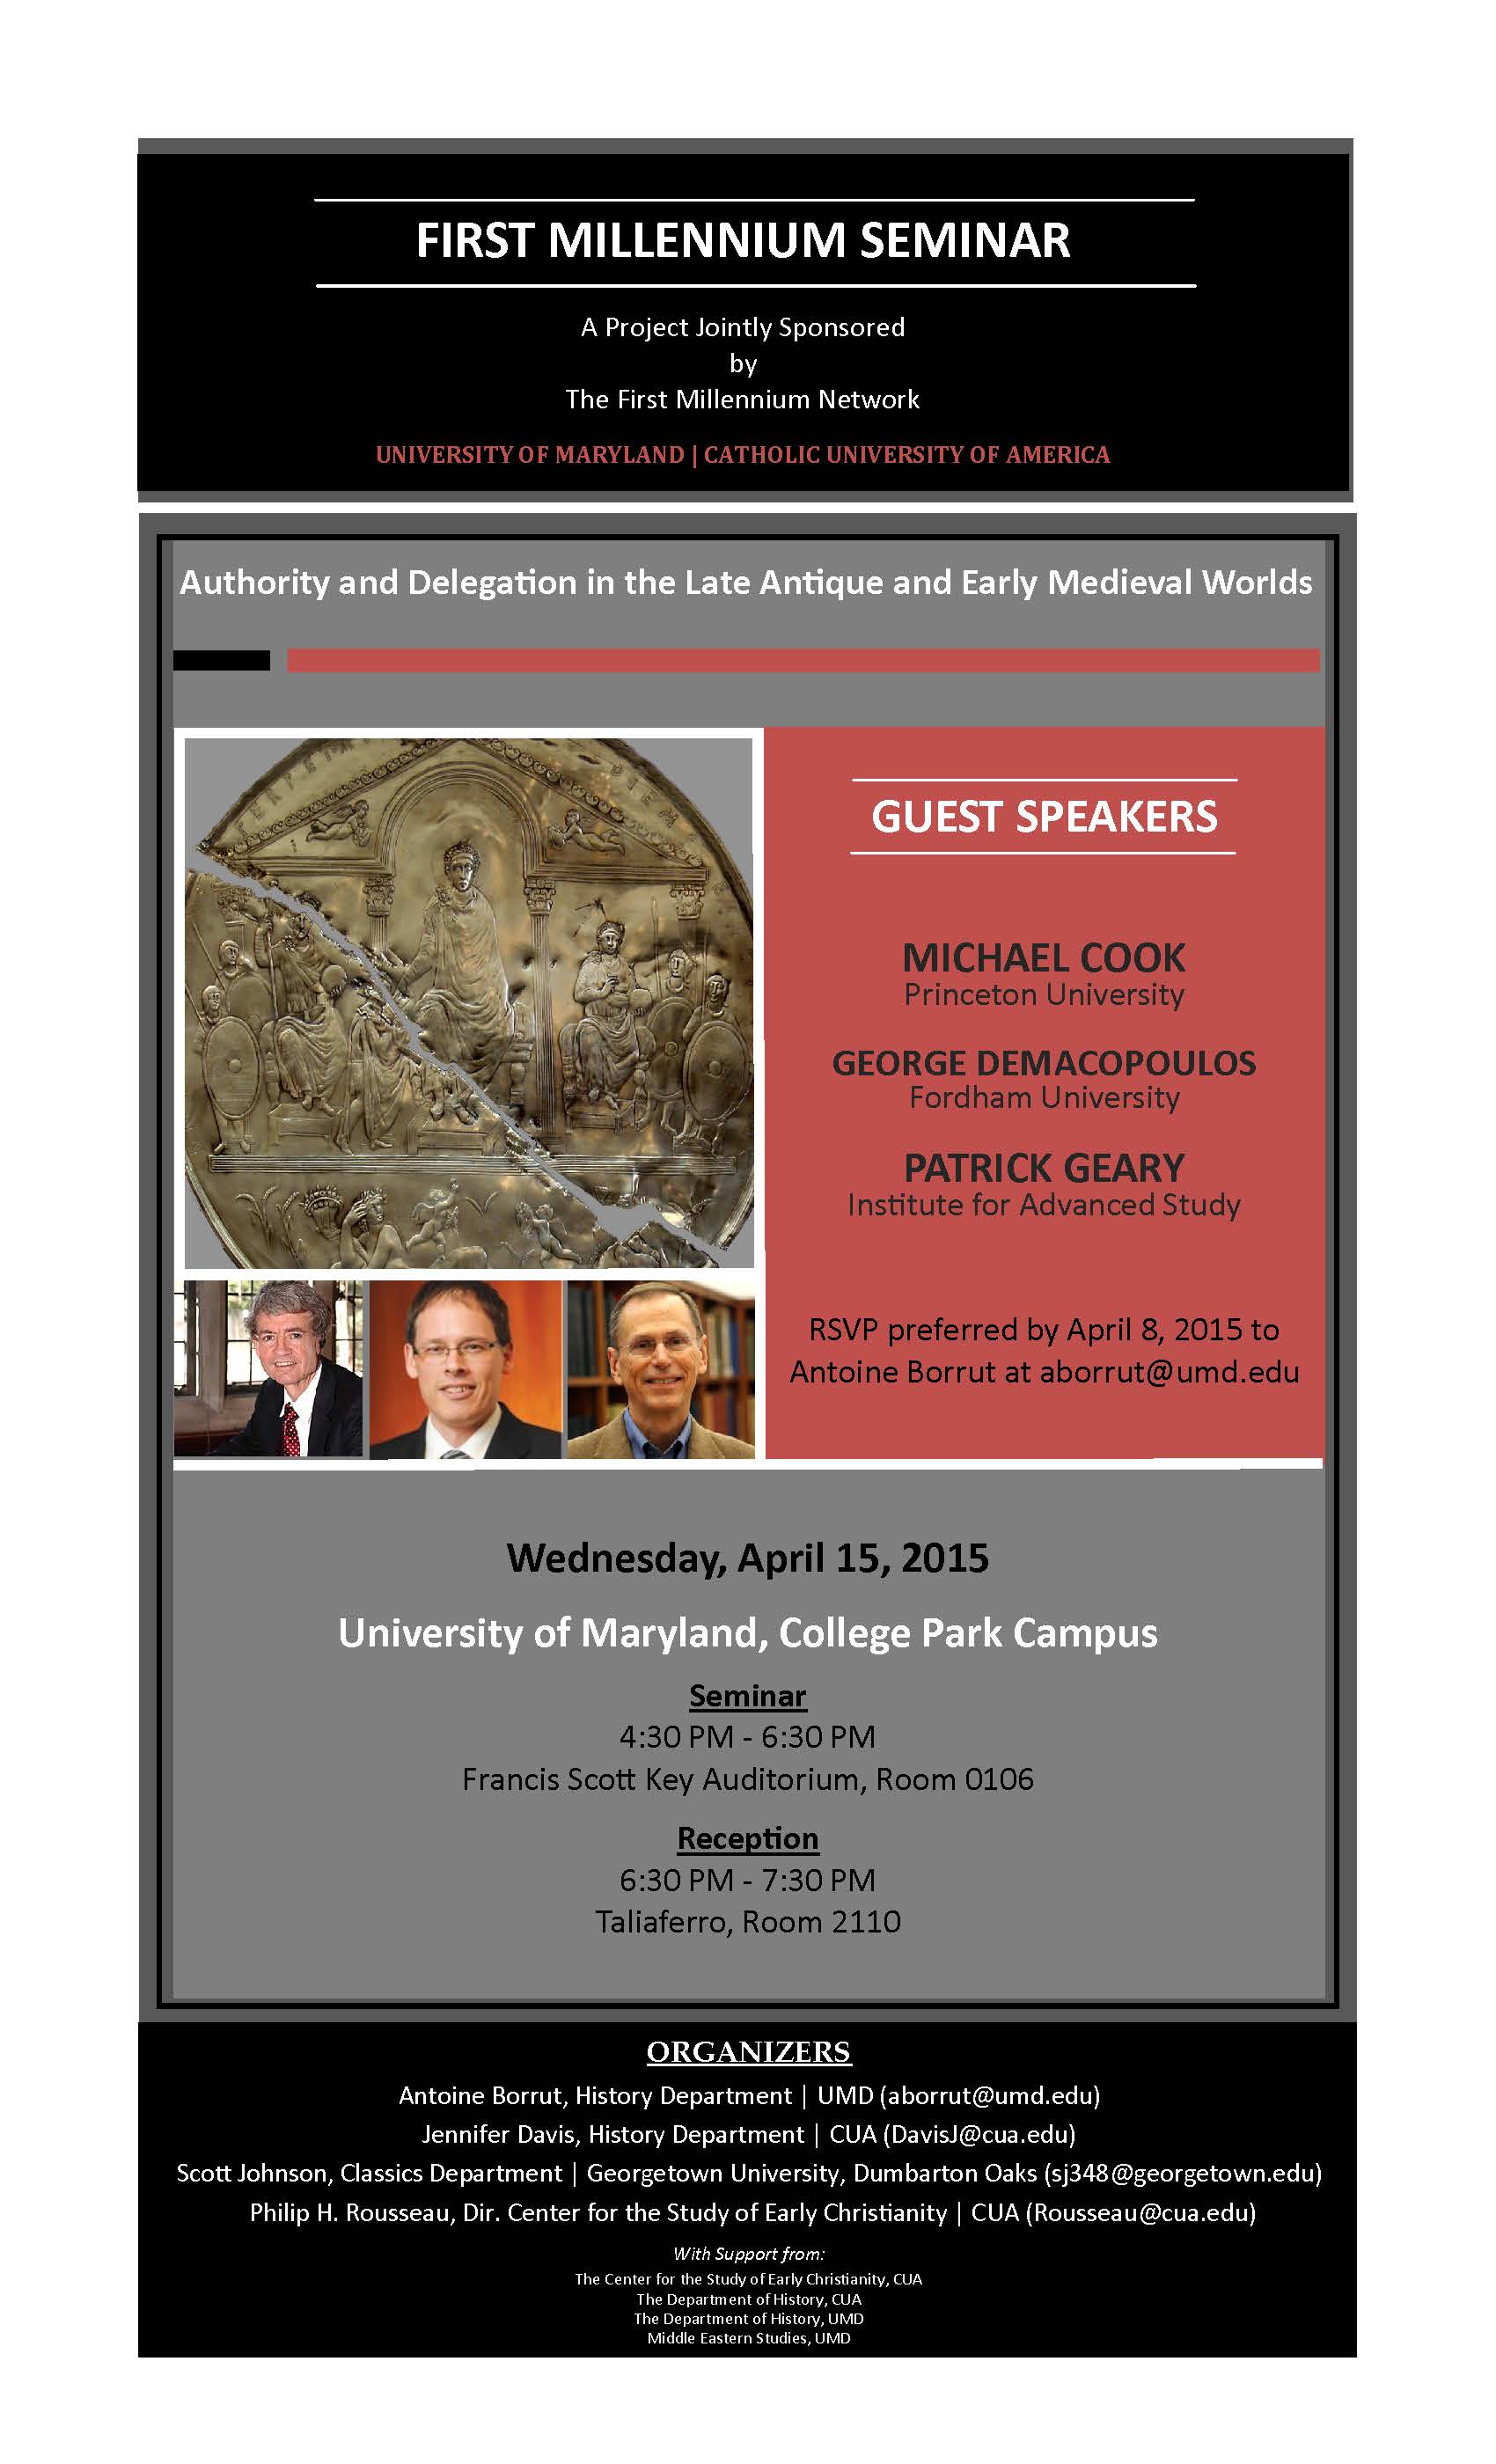 Image for event - First Millennium Seminar - Authority and Delegation in the Late Antique and Early Medieval Worlds